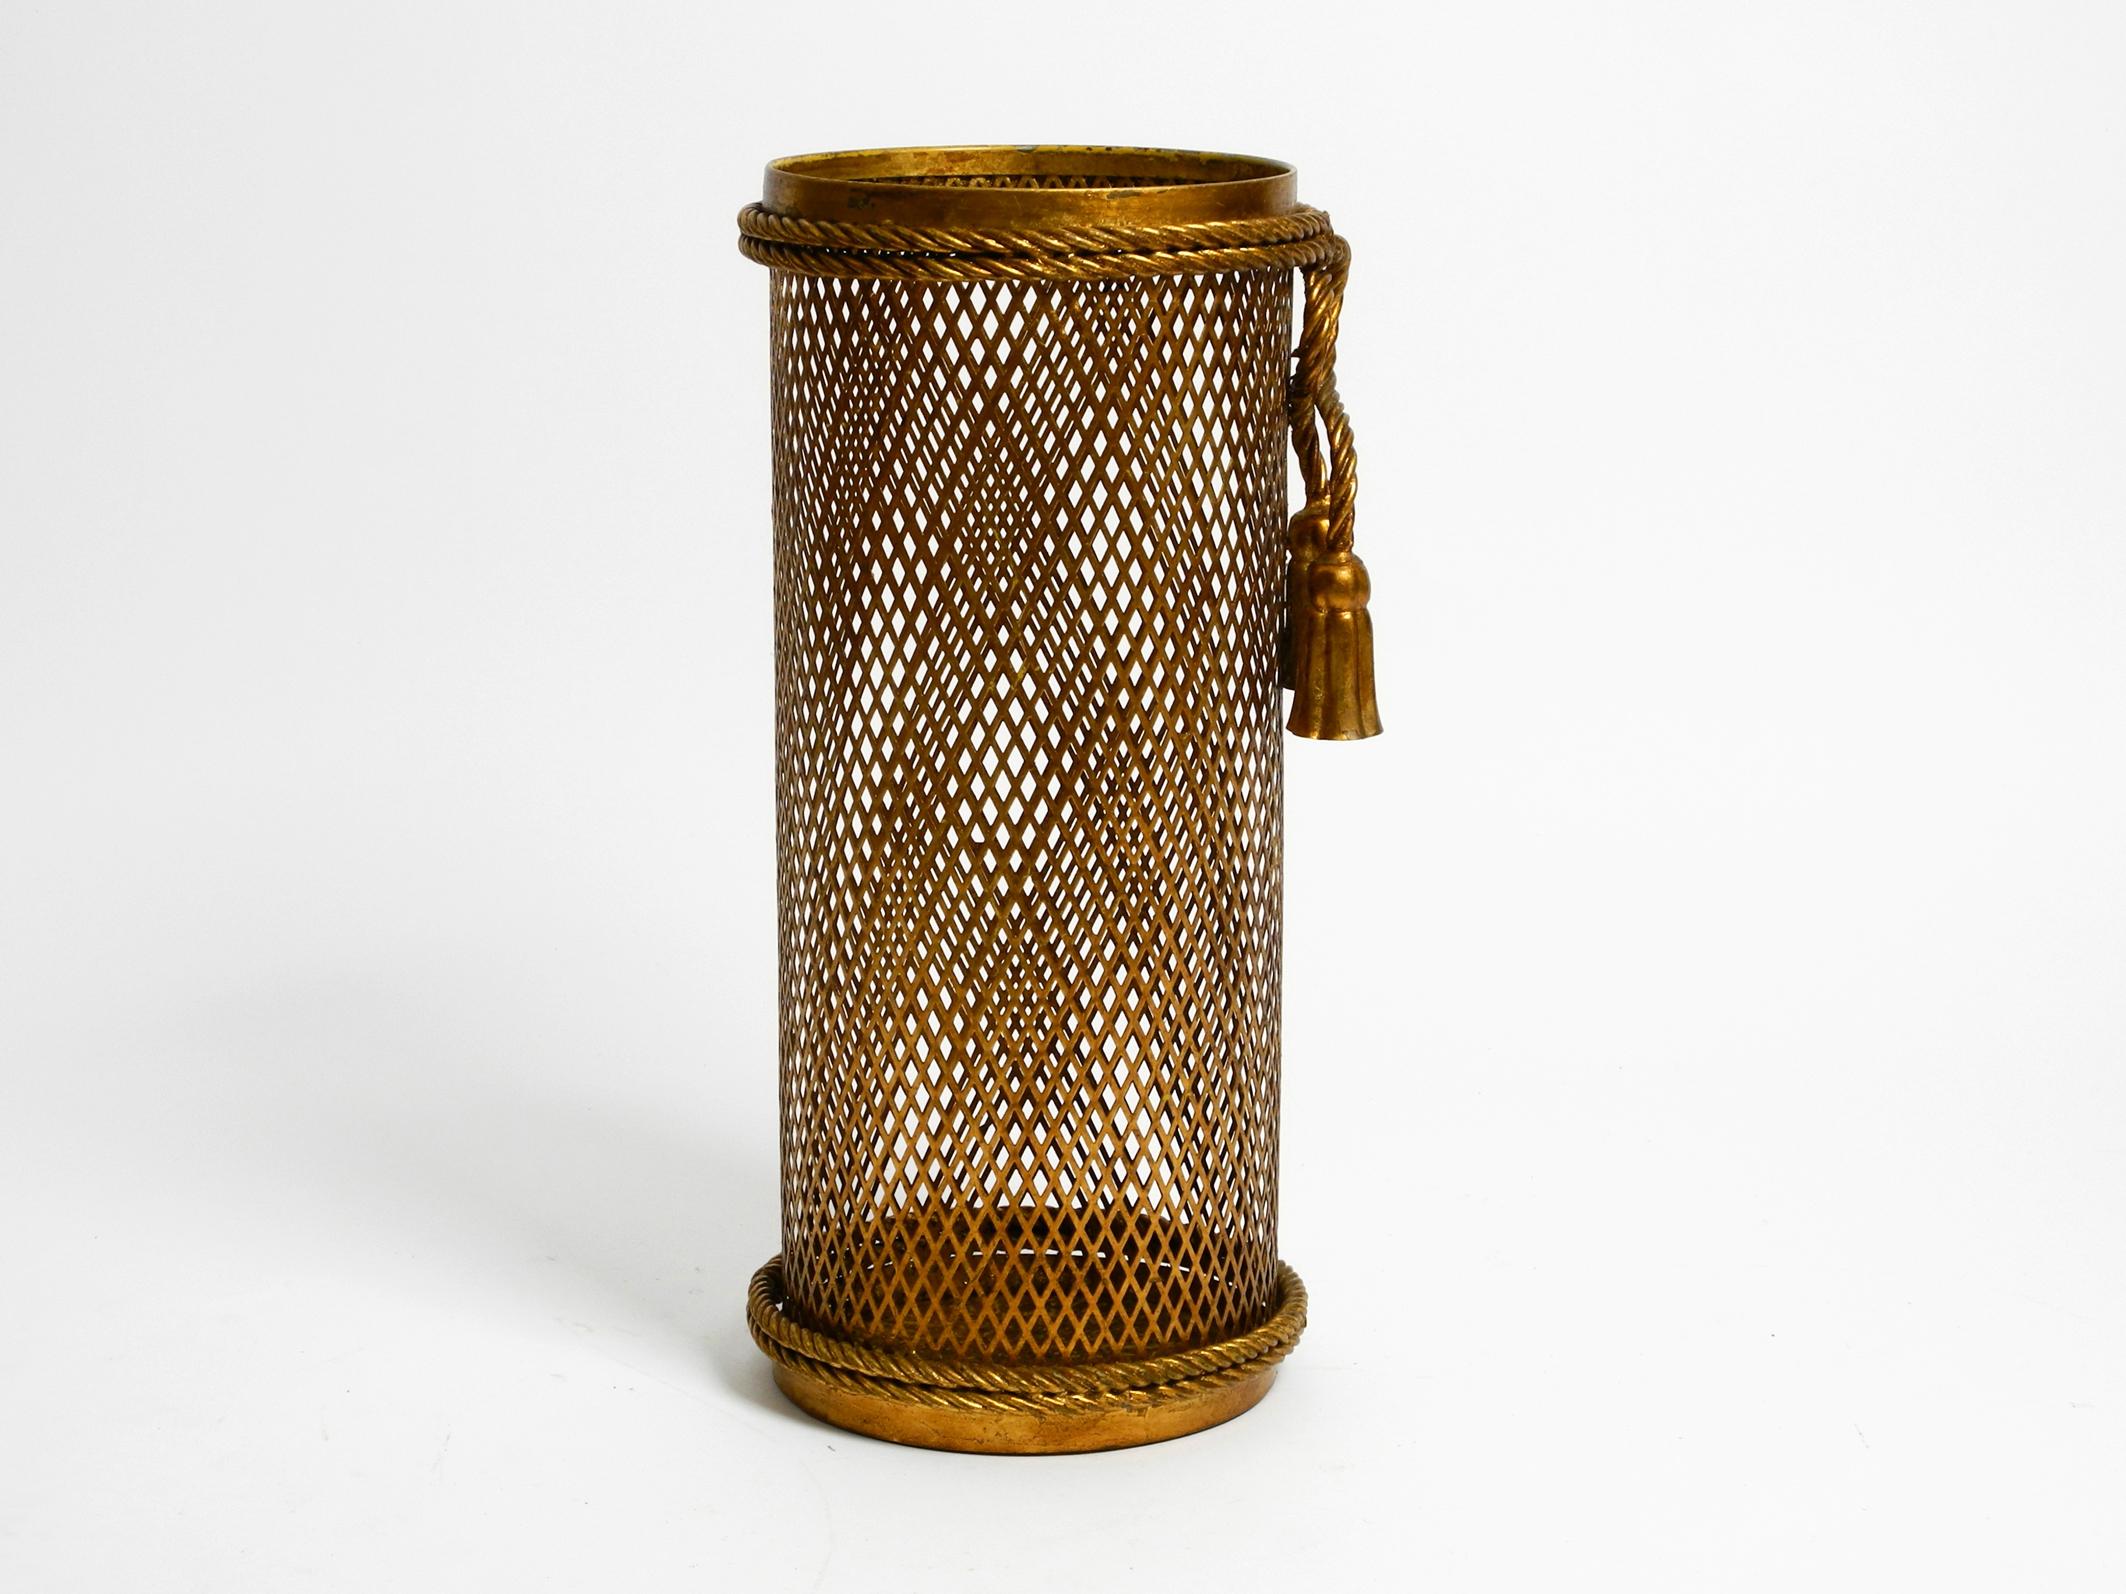 Very elegant Mid Century Regency umbrella stand made of gold-plated metal.
Manufacturer is Li Puma. Made in Italy.
Made from perforated gold plated metal. Very high quality, elegant workmanship.
Beautiful 1960s design with lots of details.
Good